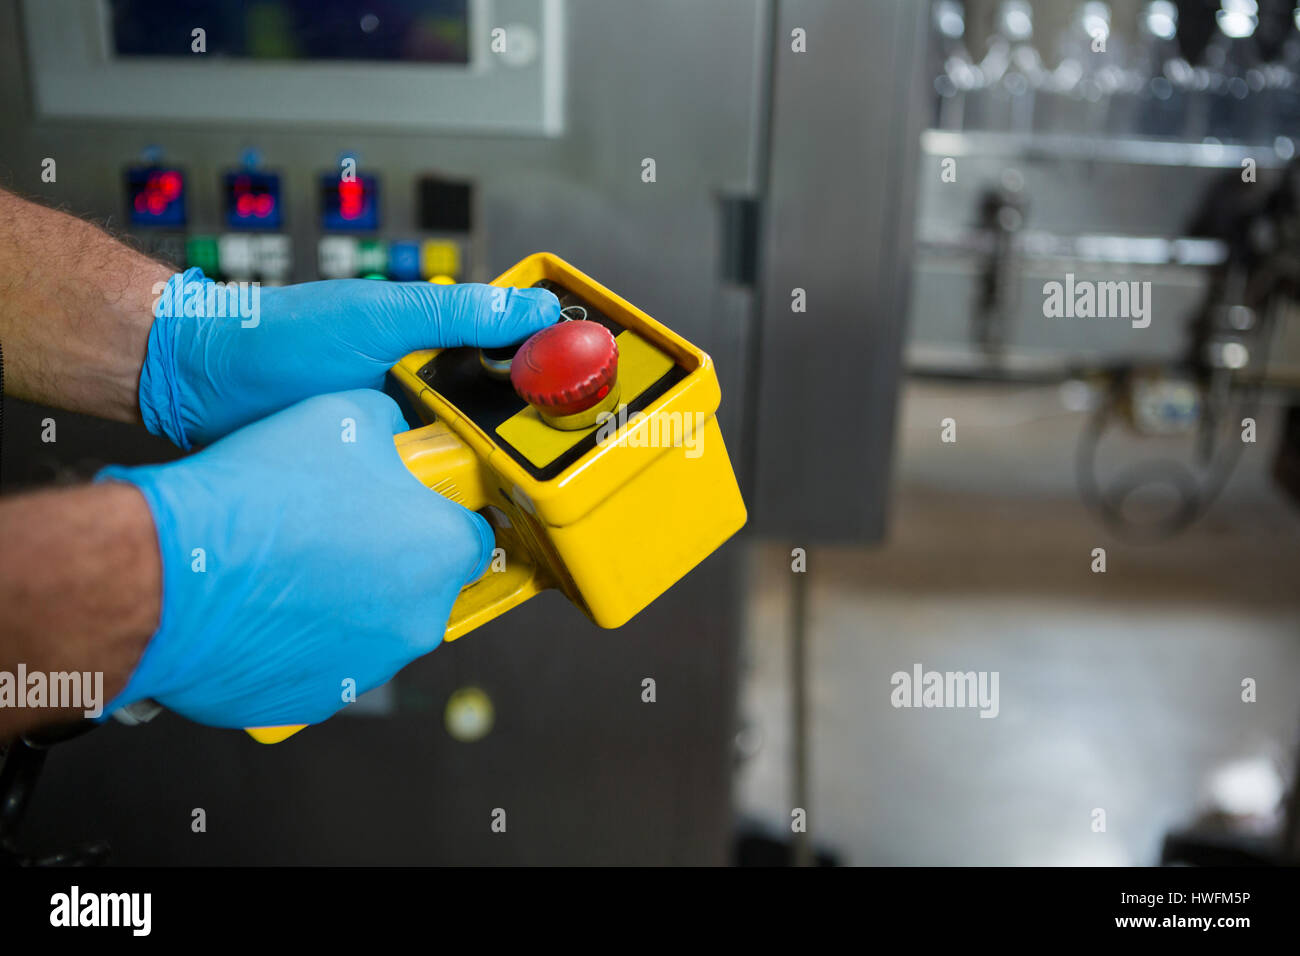 Cropped hand of worker using yellow machinery in factory Stock Photo